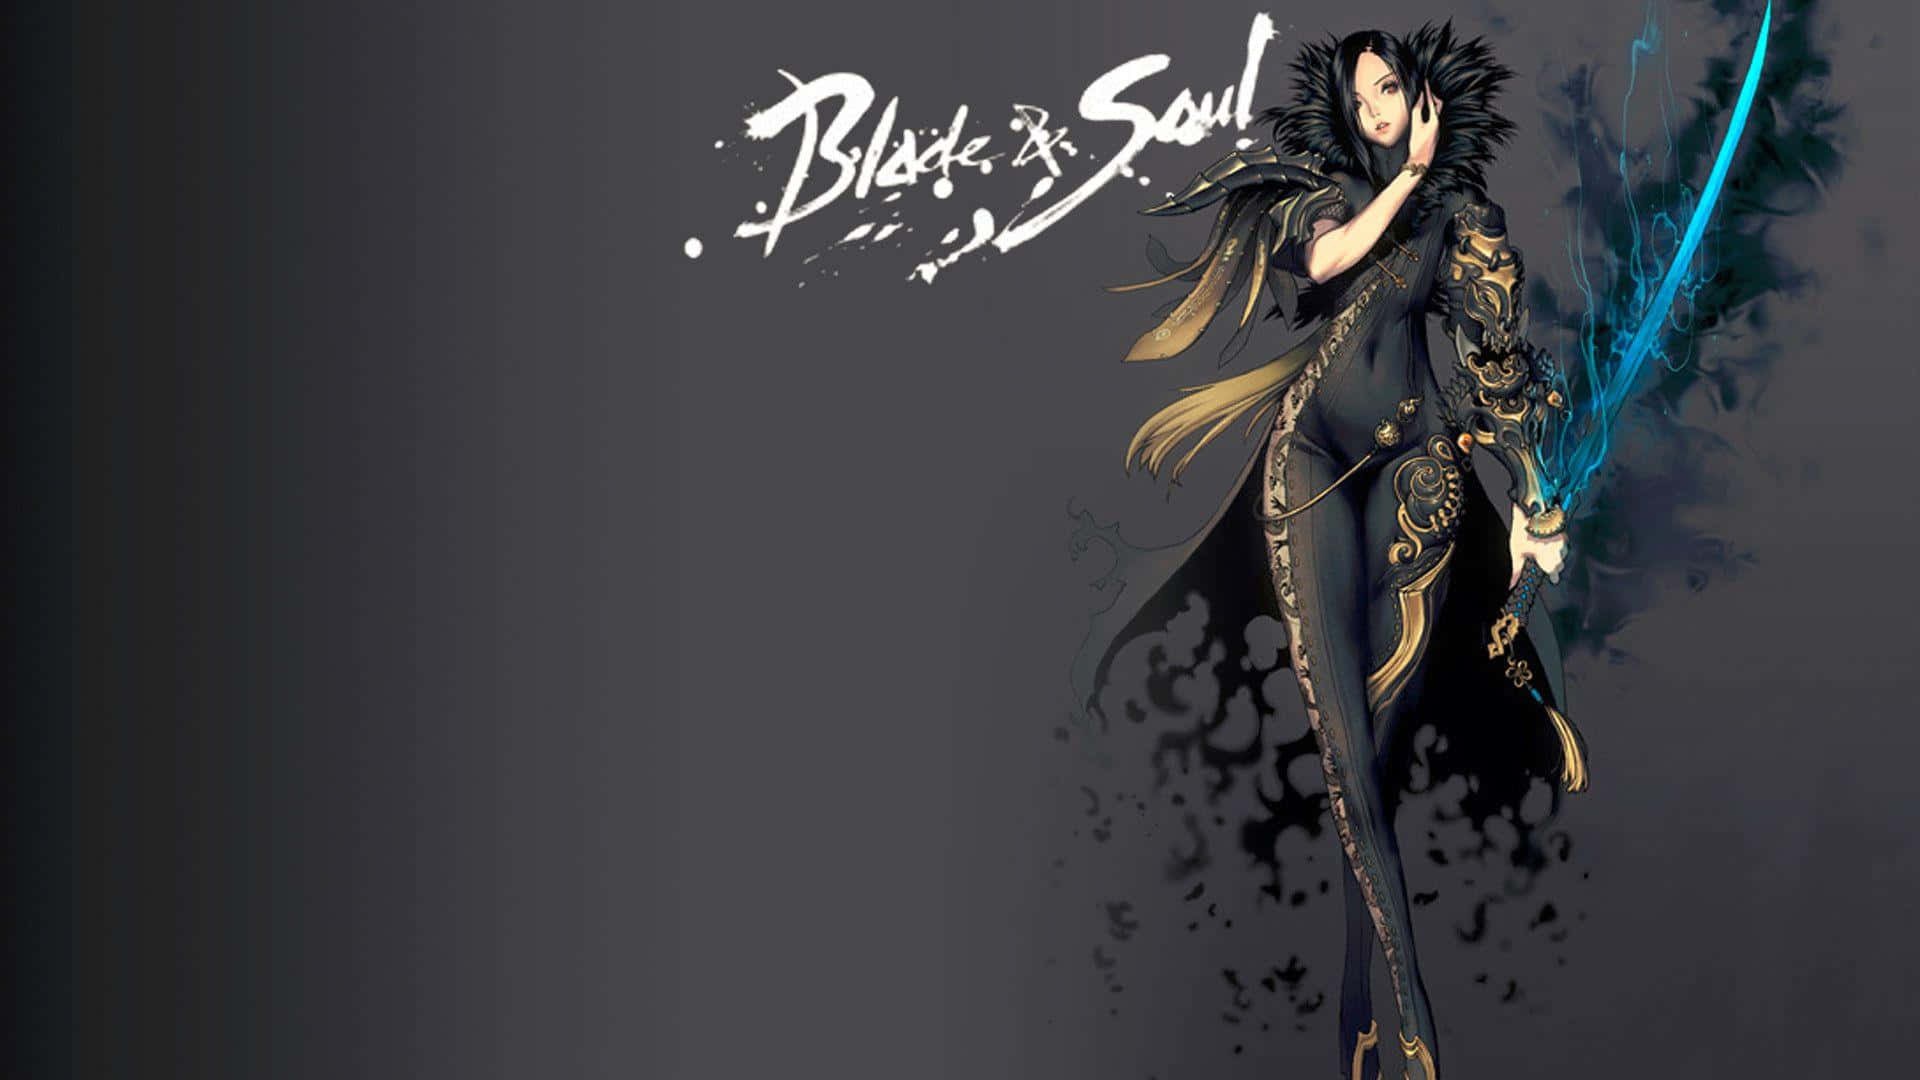 Prepare to fight in the world of Blade and Soul Wallpaper